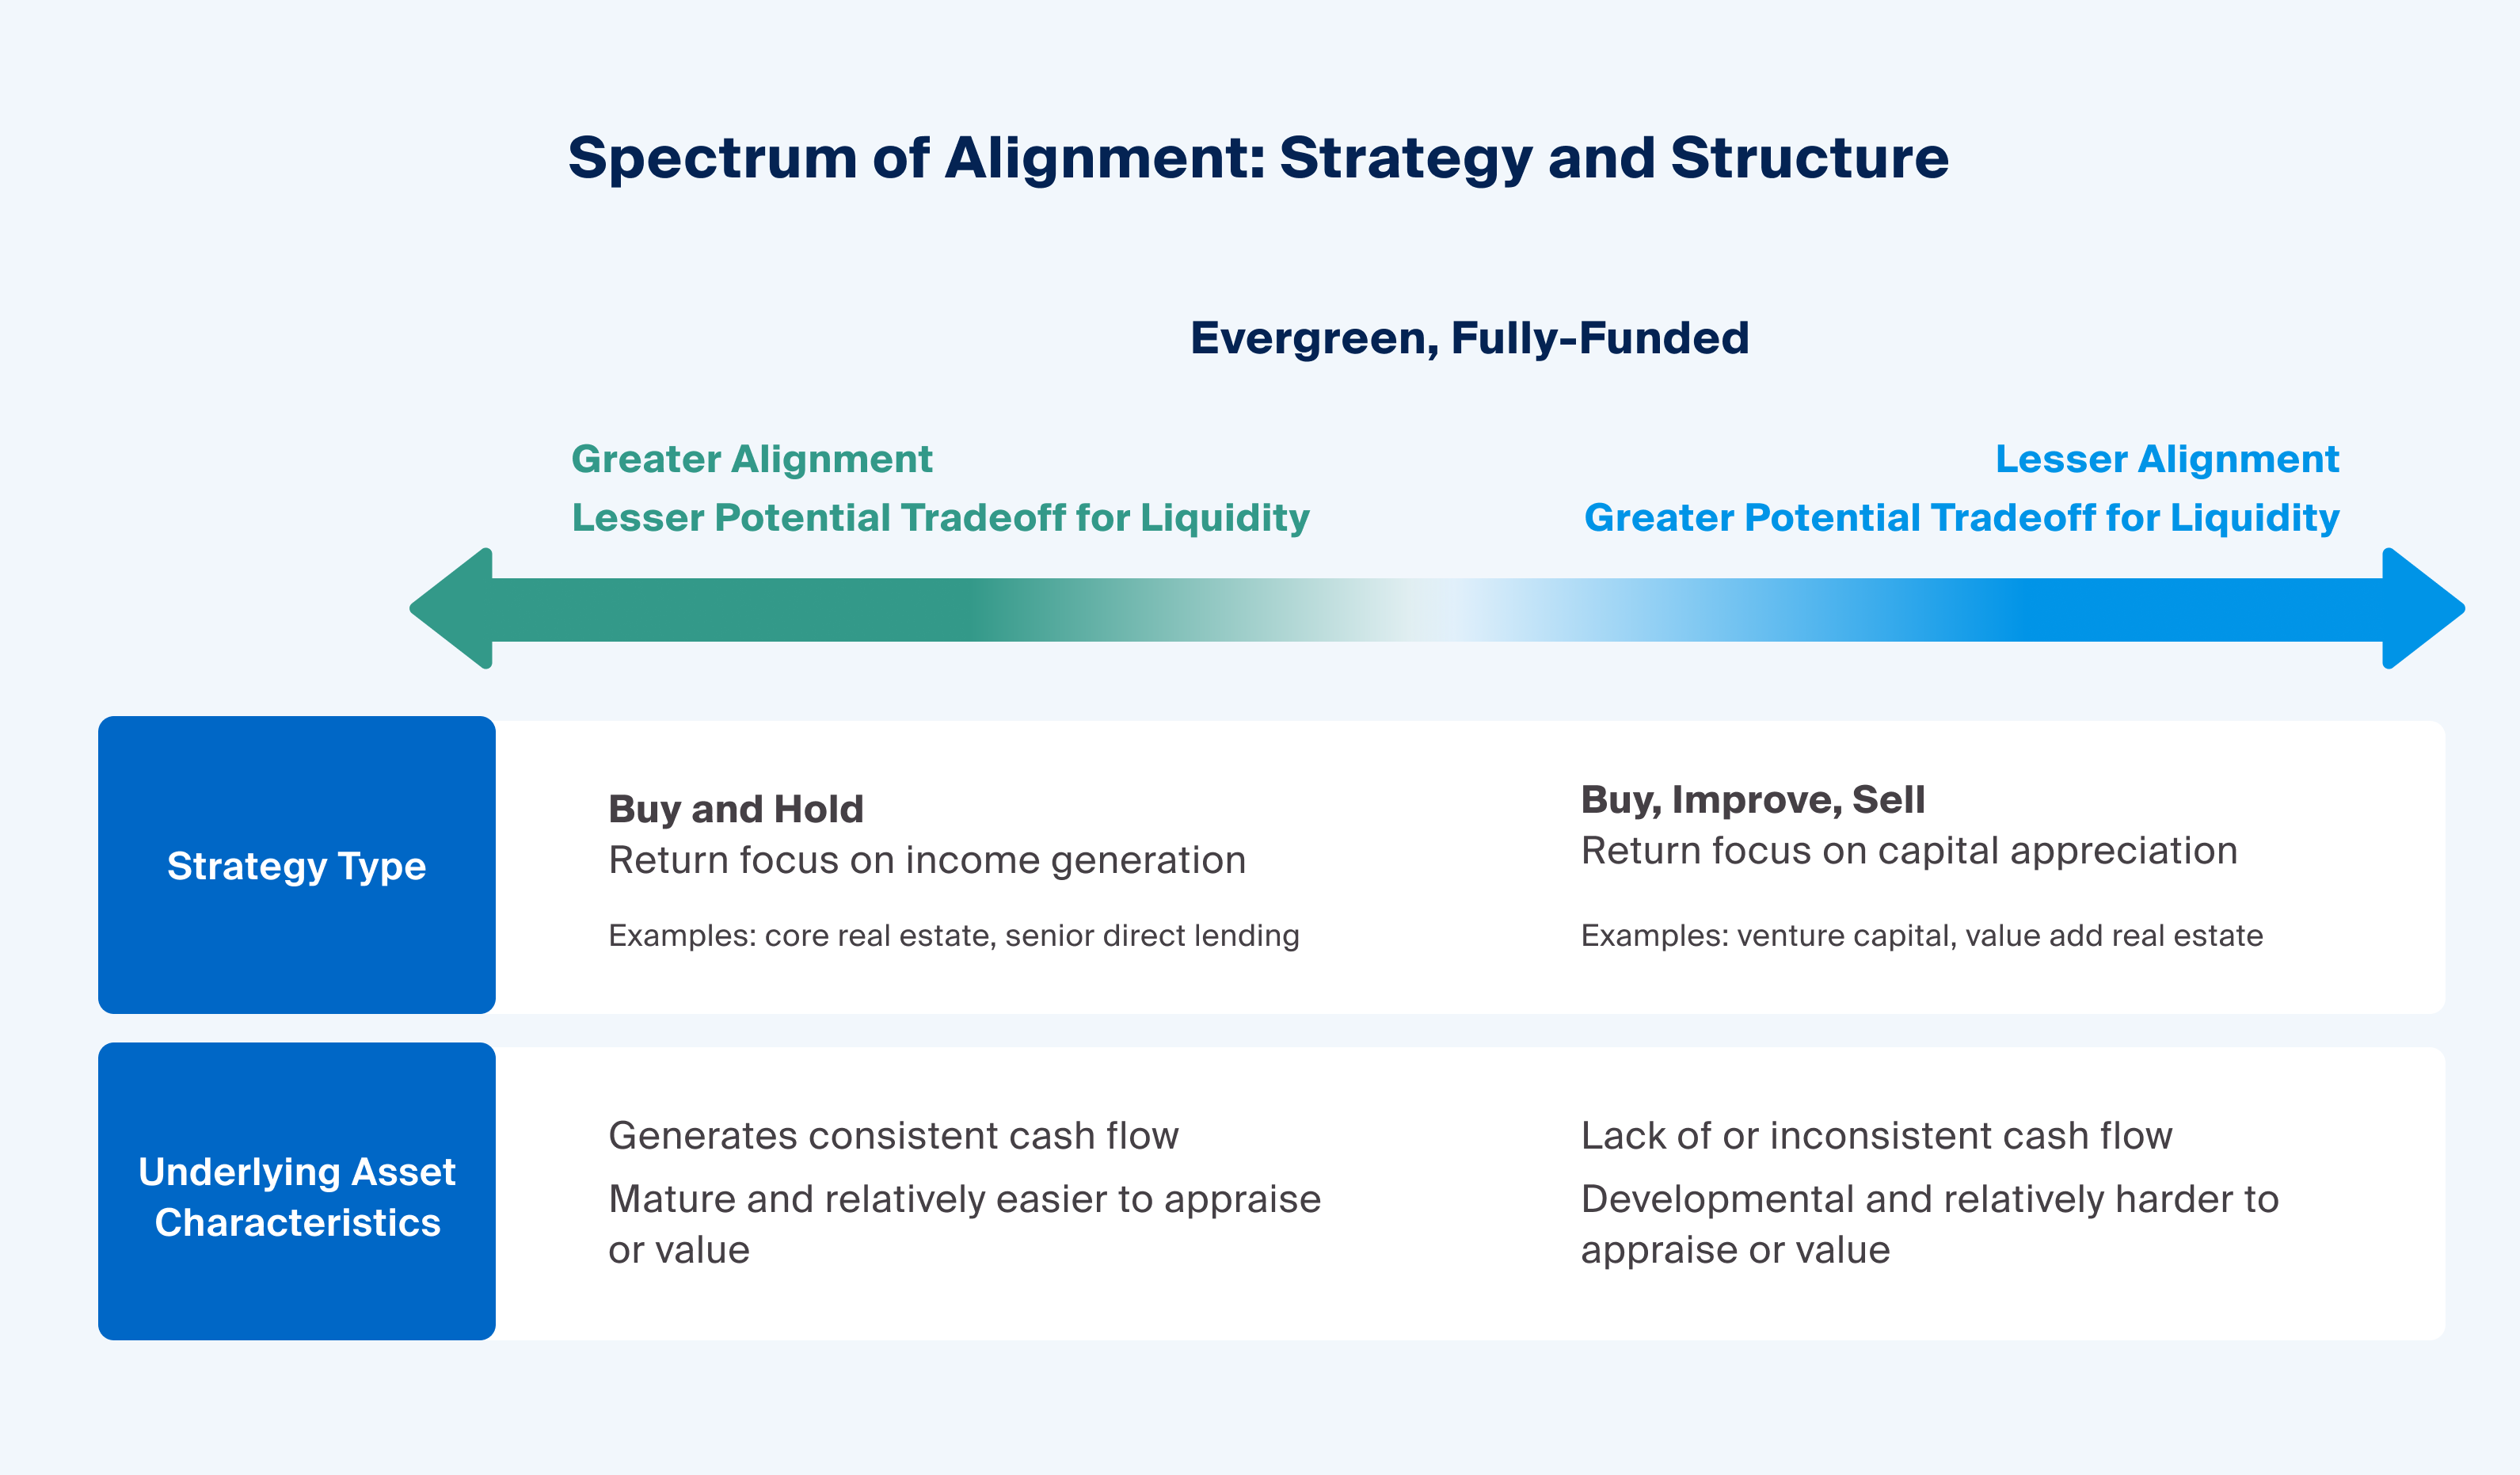 Certain private market strategies, asset types mitigate potential tradeoff of returns for fund-level liquidity in evergreen, fully funded structures